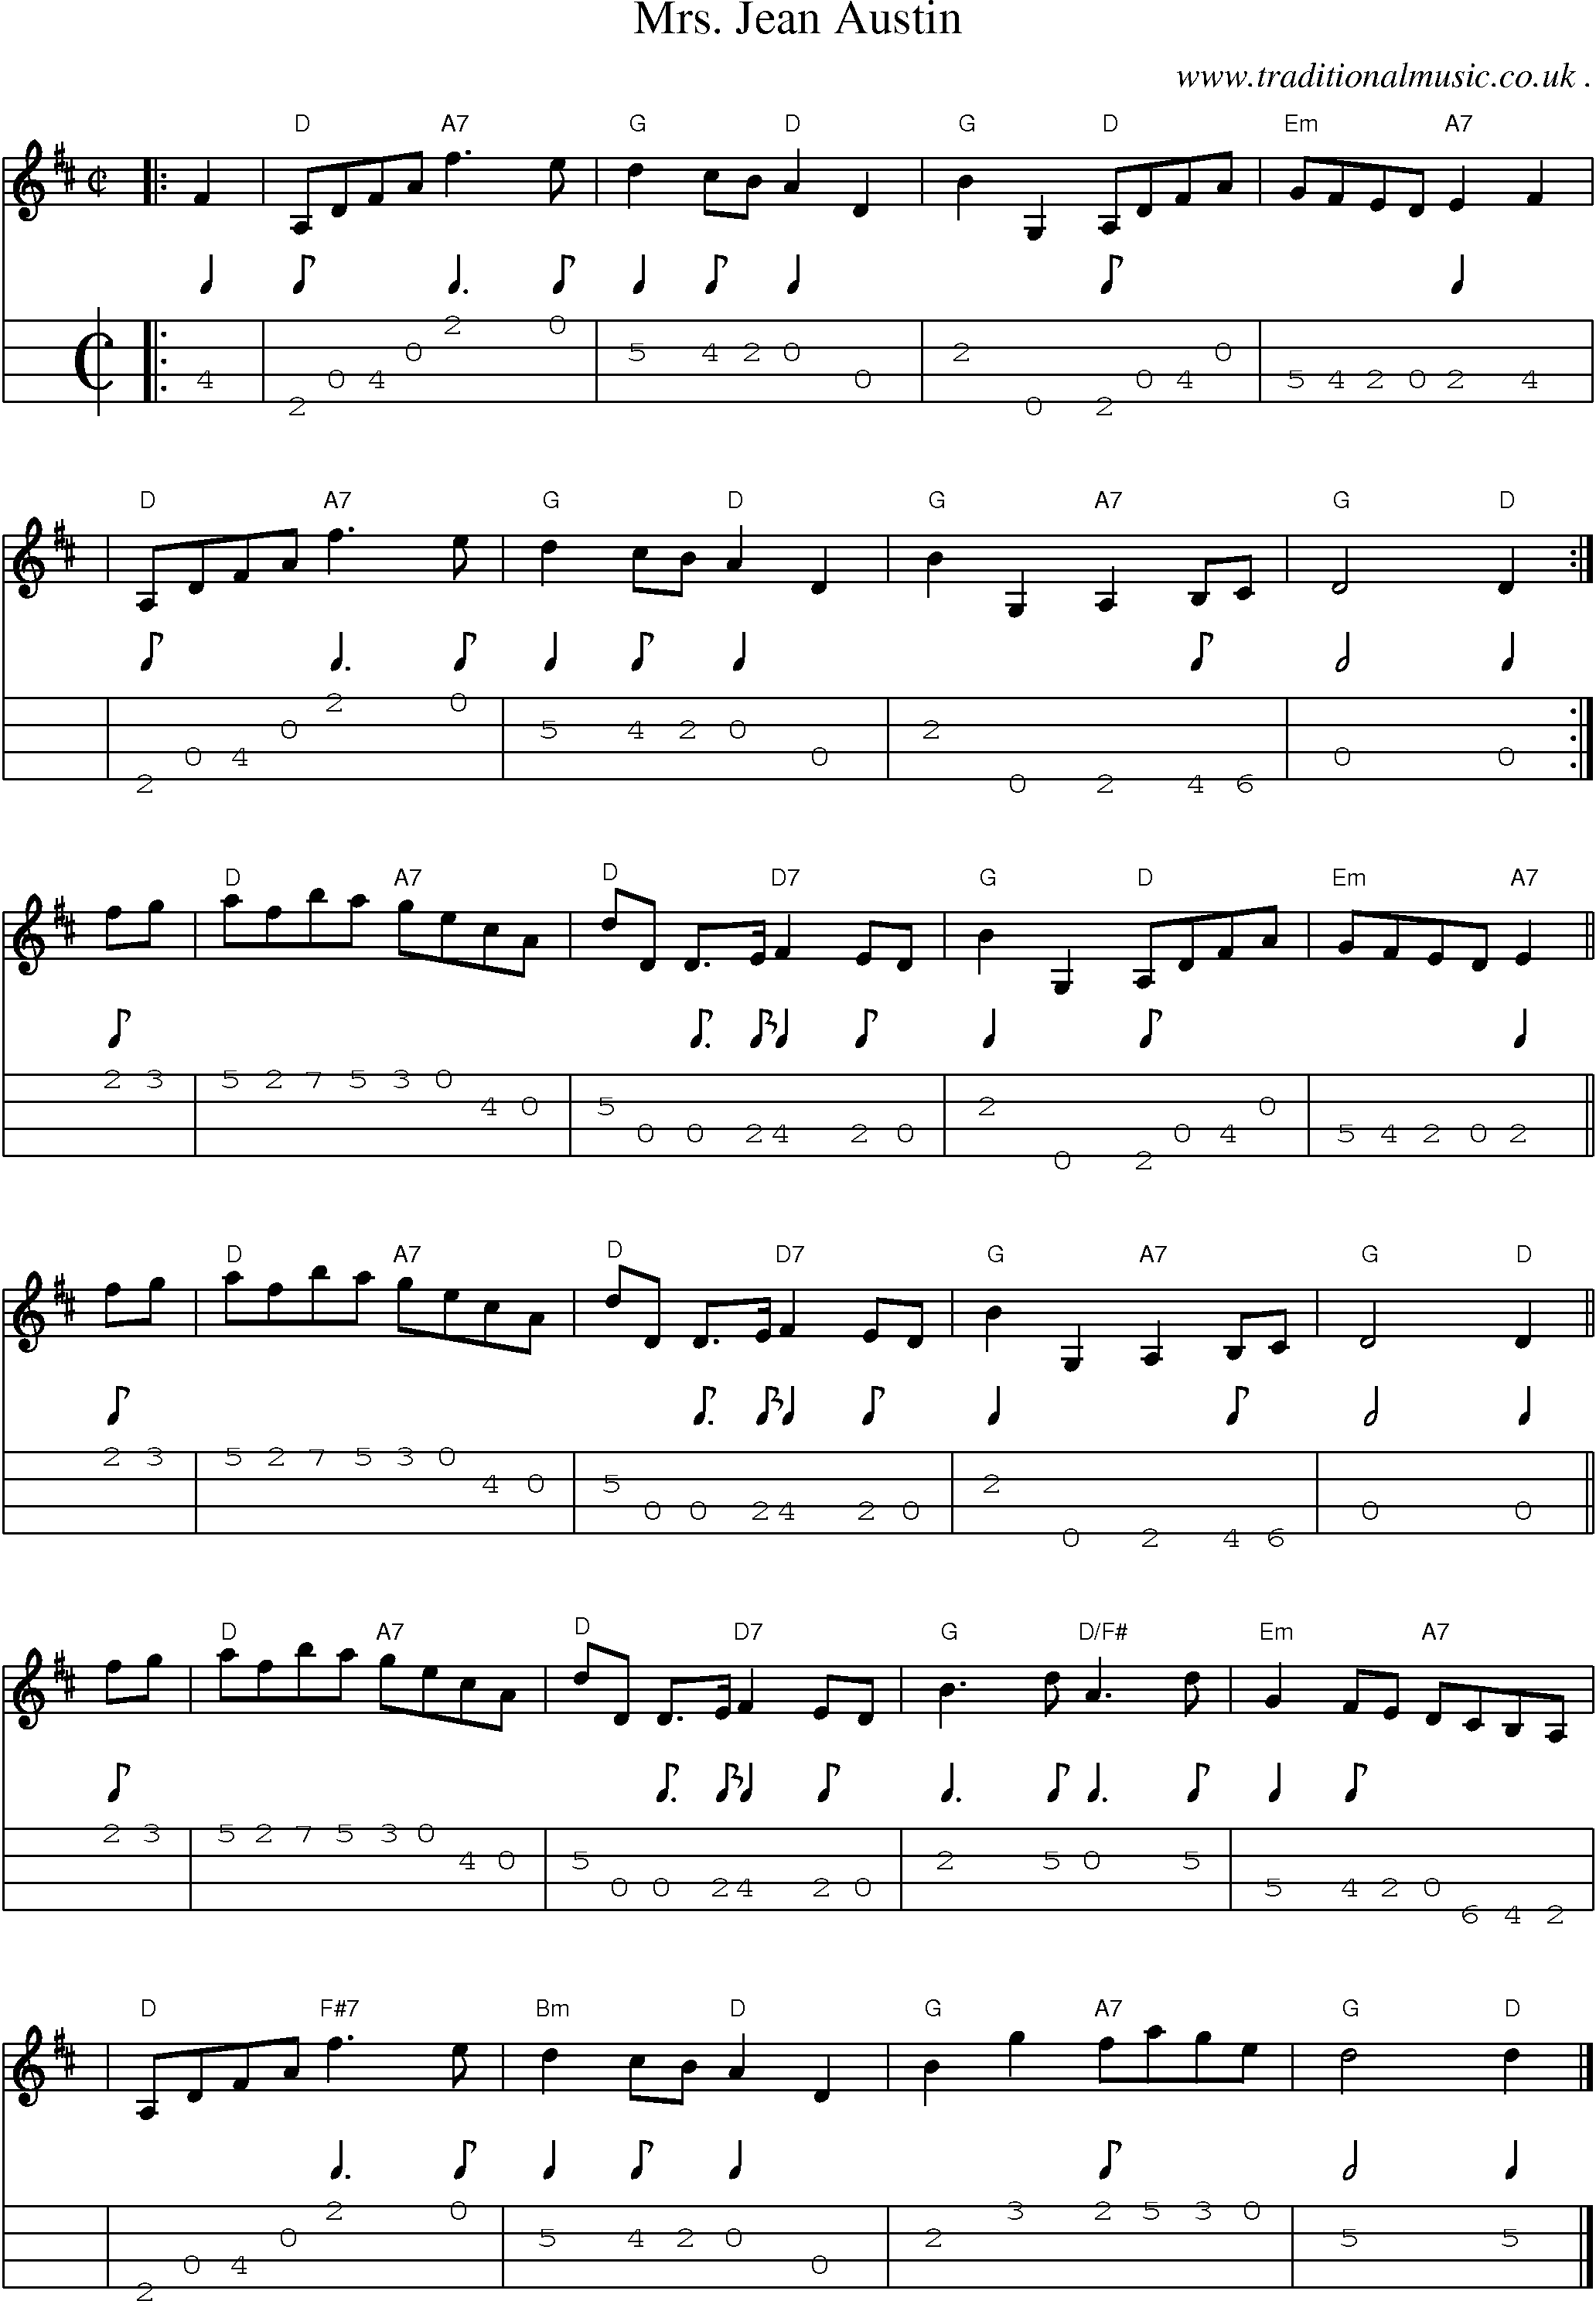 Sheet-music  score, Chords and Mandolin Tabs for Mrs Jean Austin